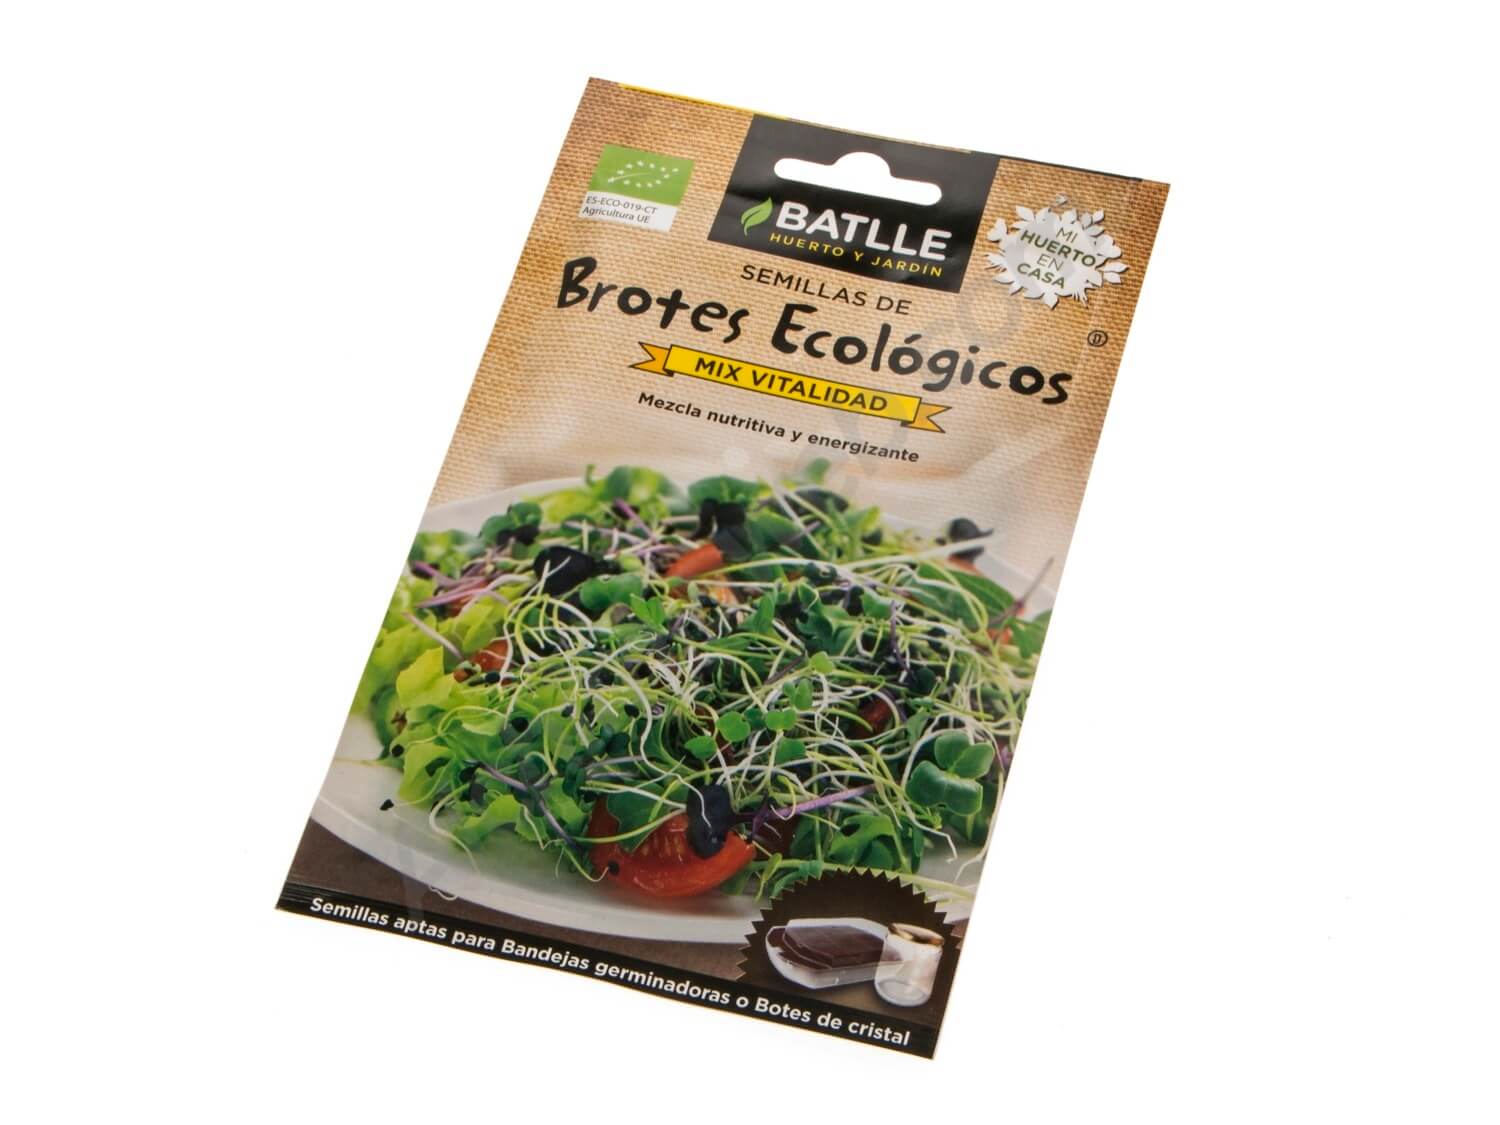 Organic Vitality Mix Sprouts - Batlle 